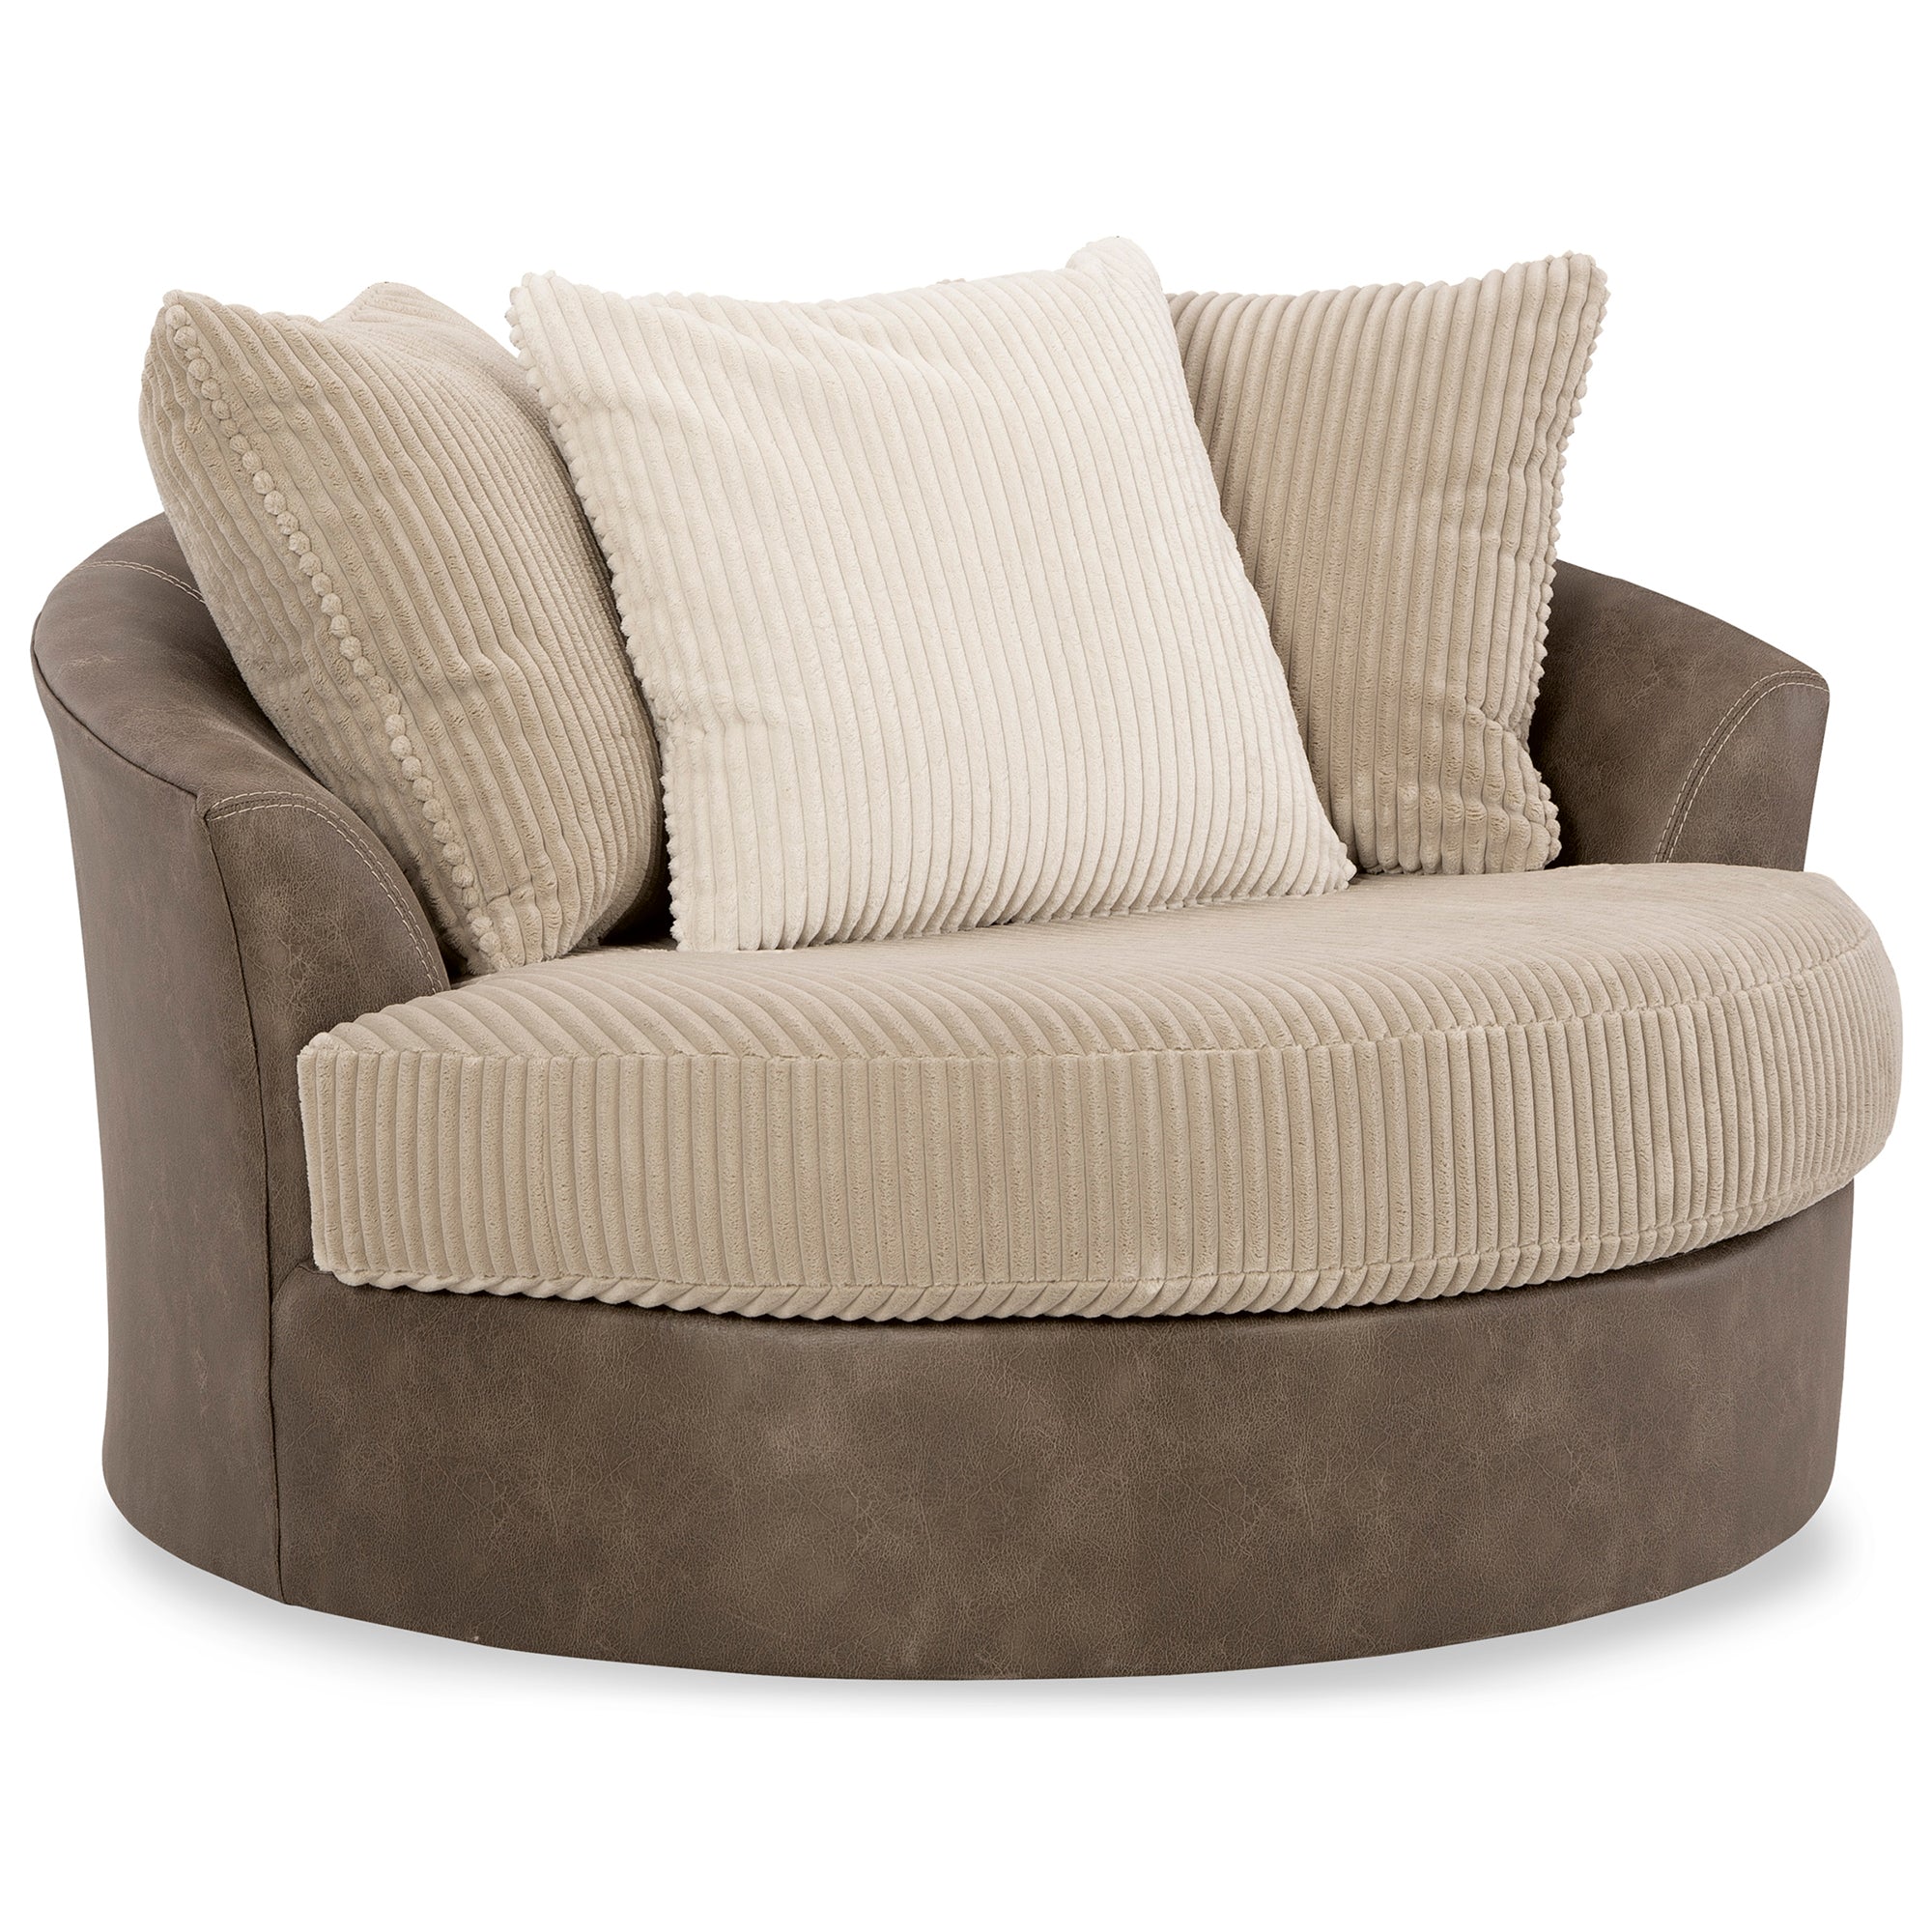 Keskin Oversized Swivel Accent Chair in Sand Color